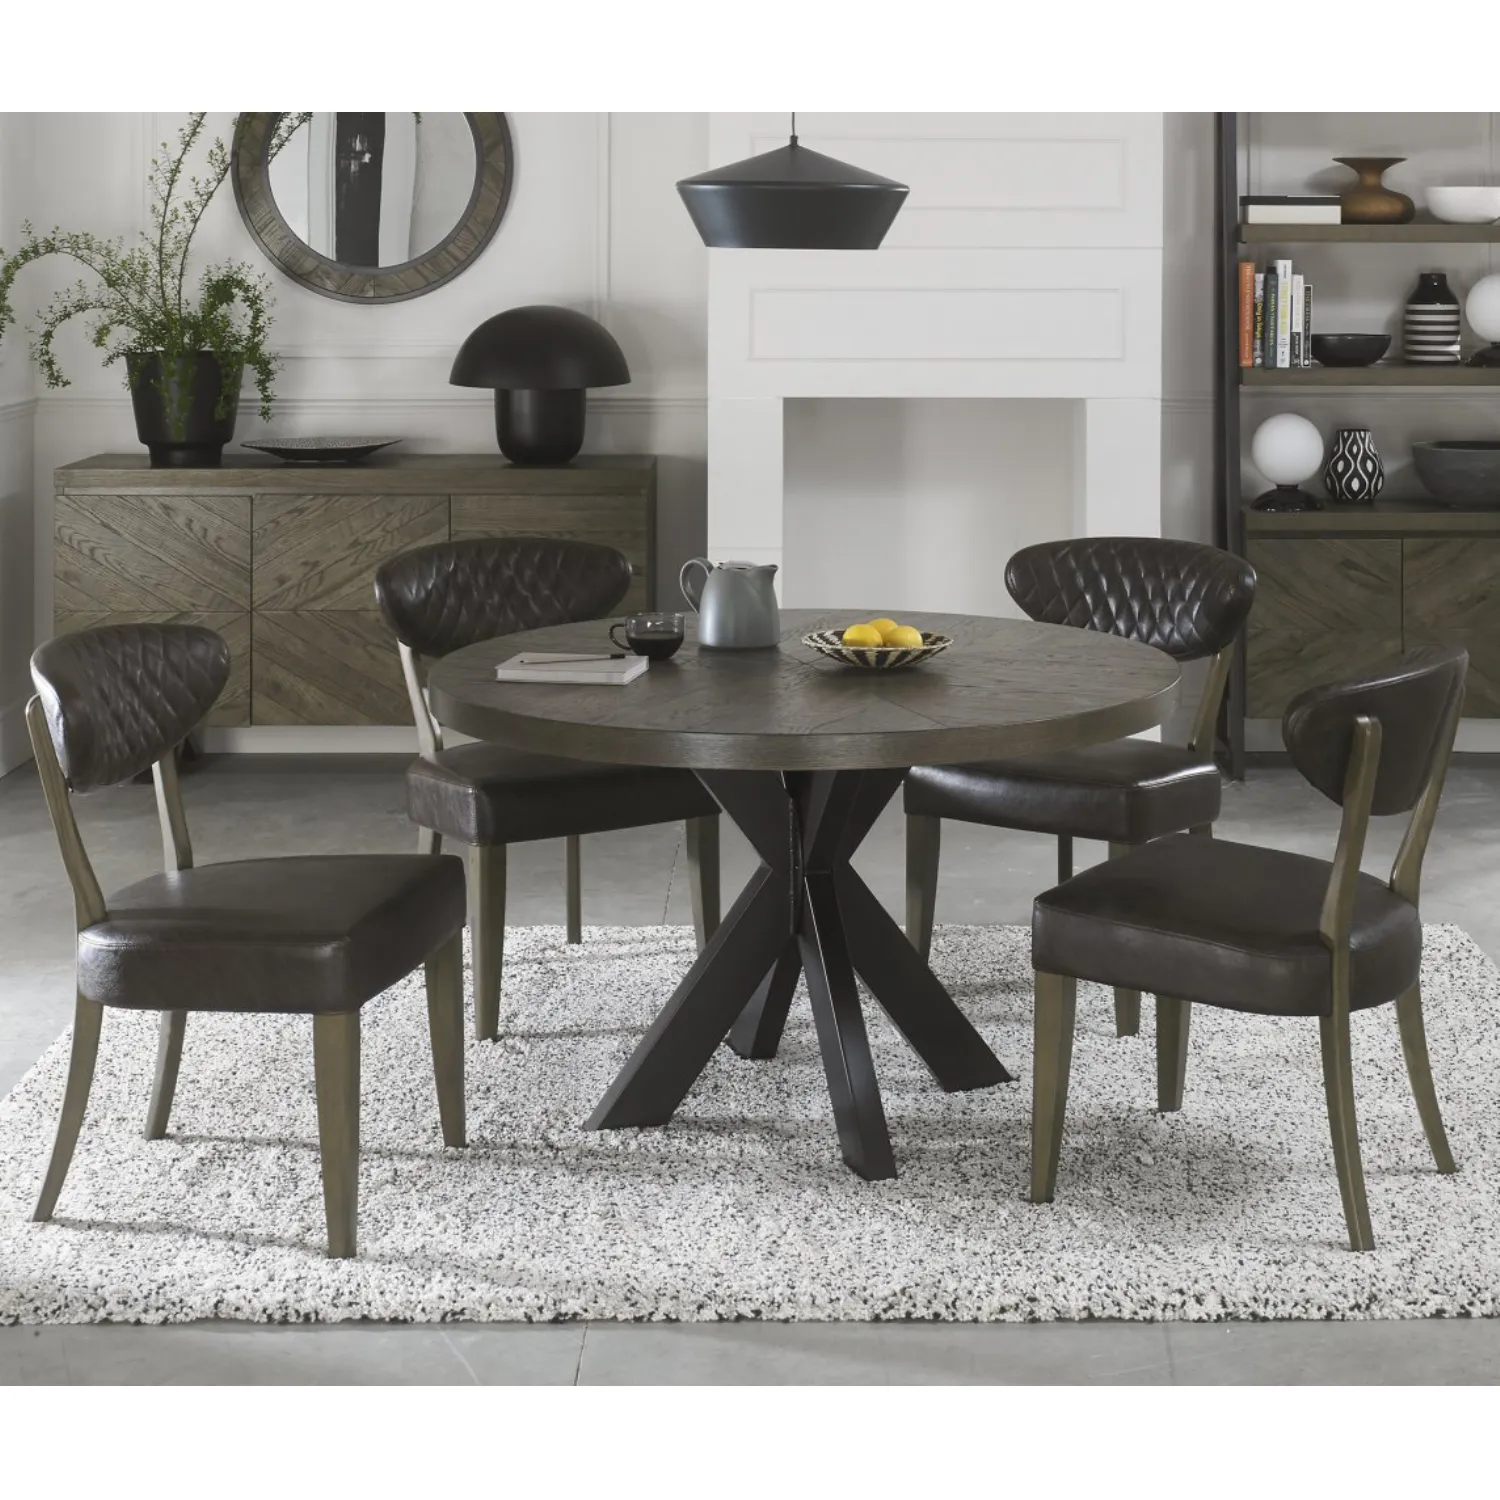 Dark Oak Small Round Dining Table Set 4 Grey Leather Chairs